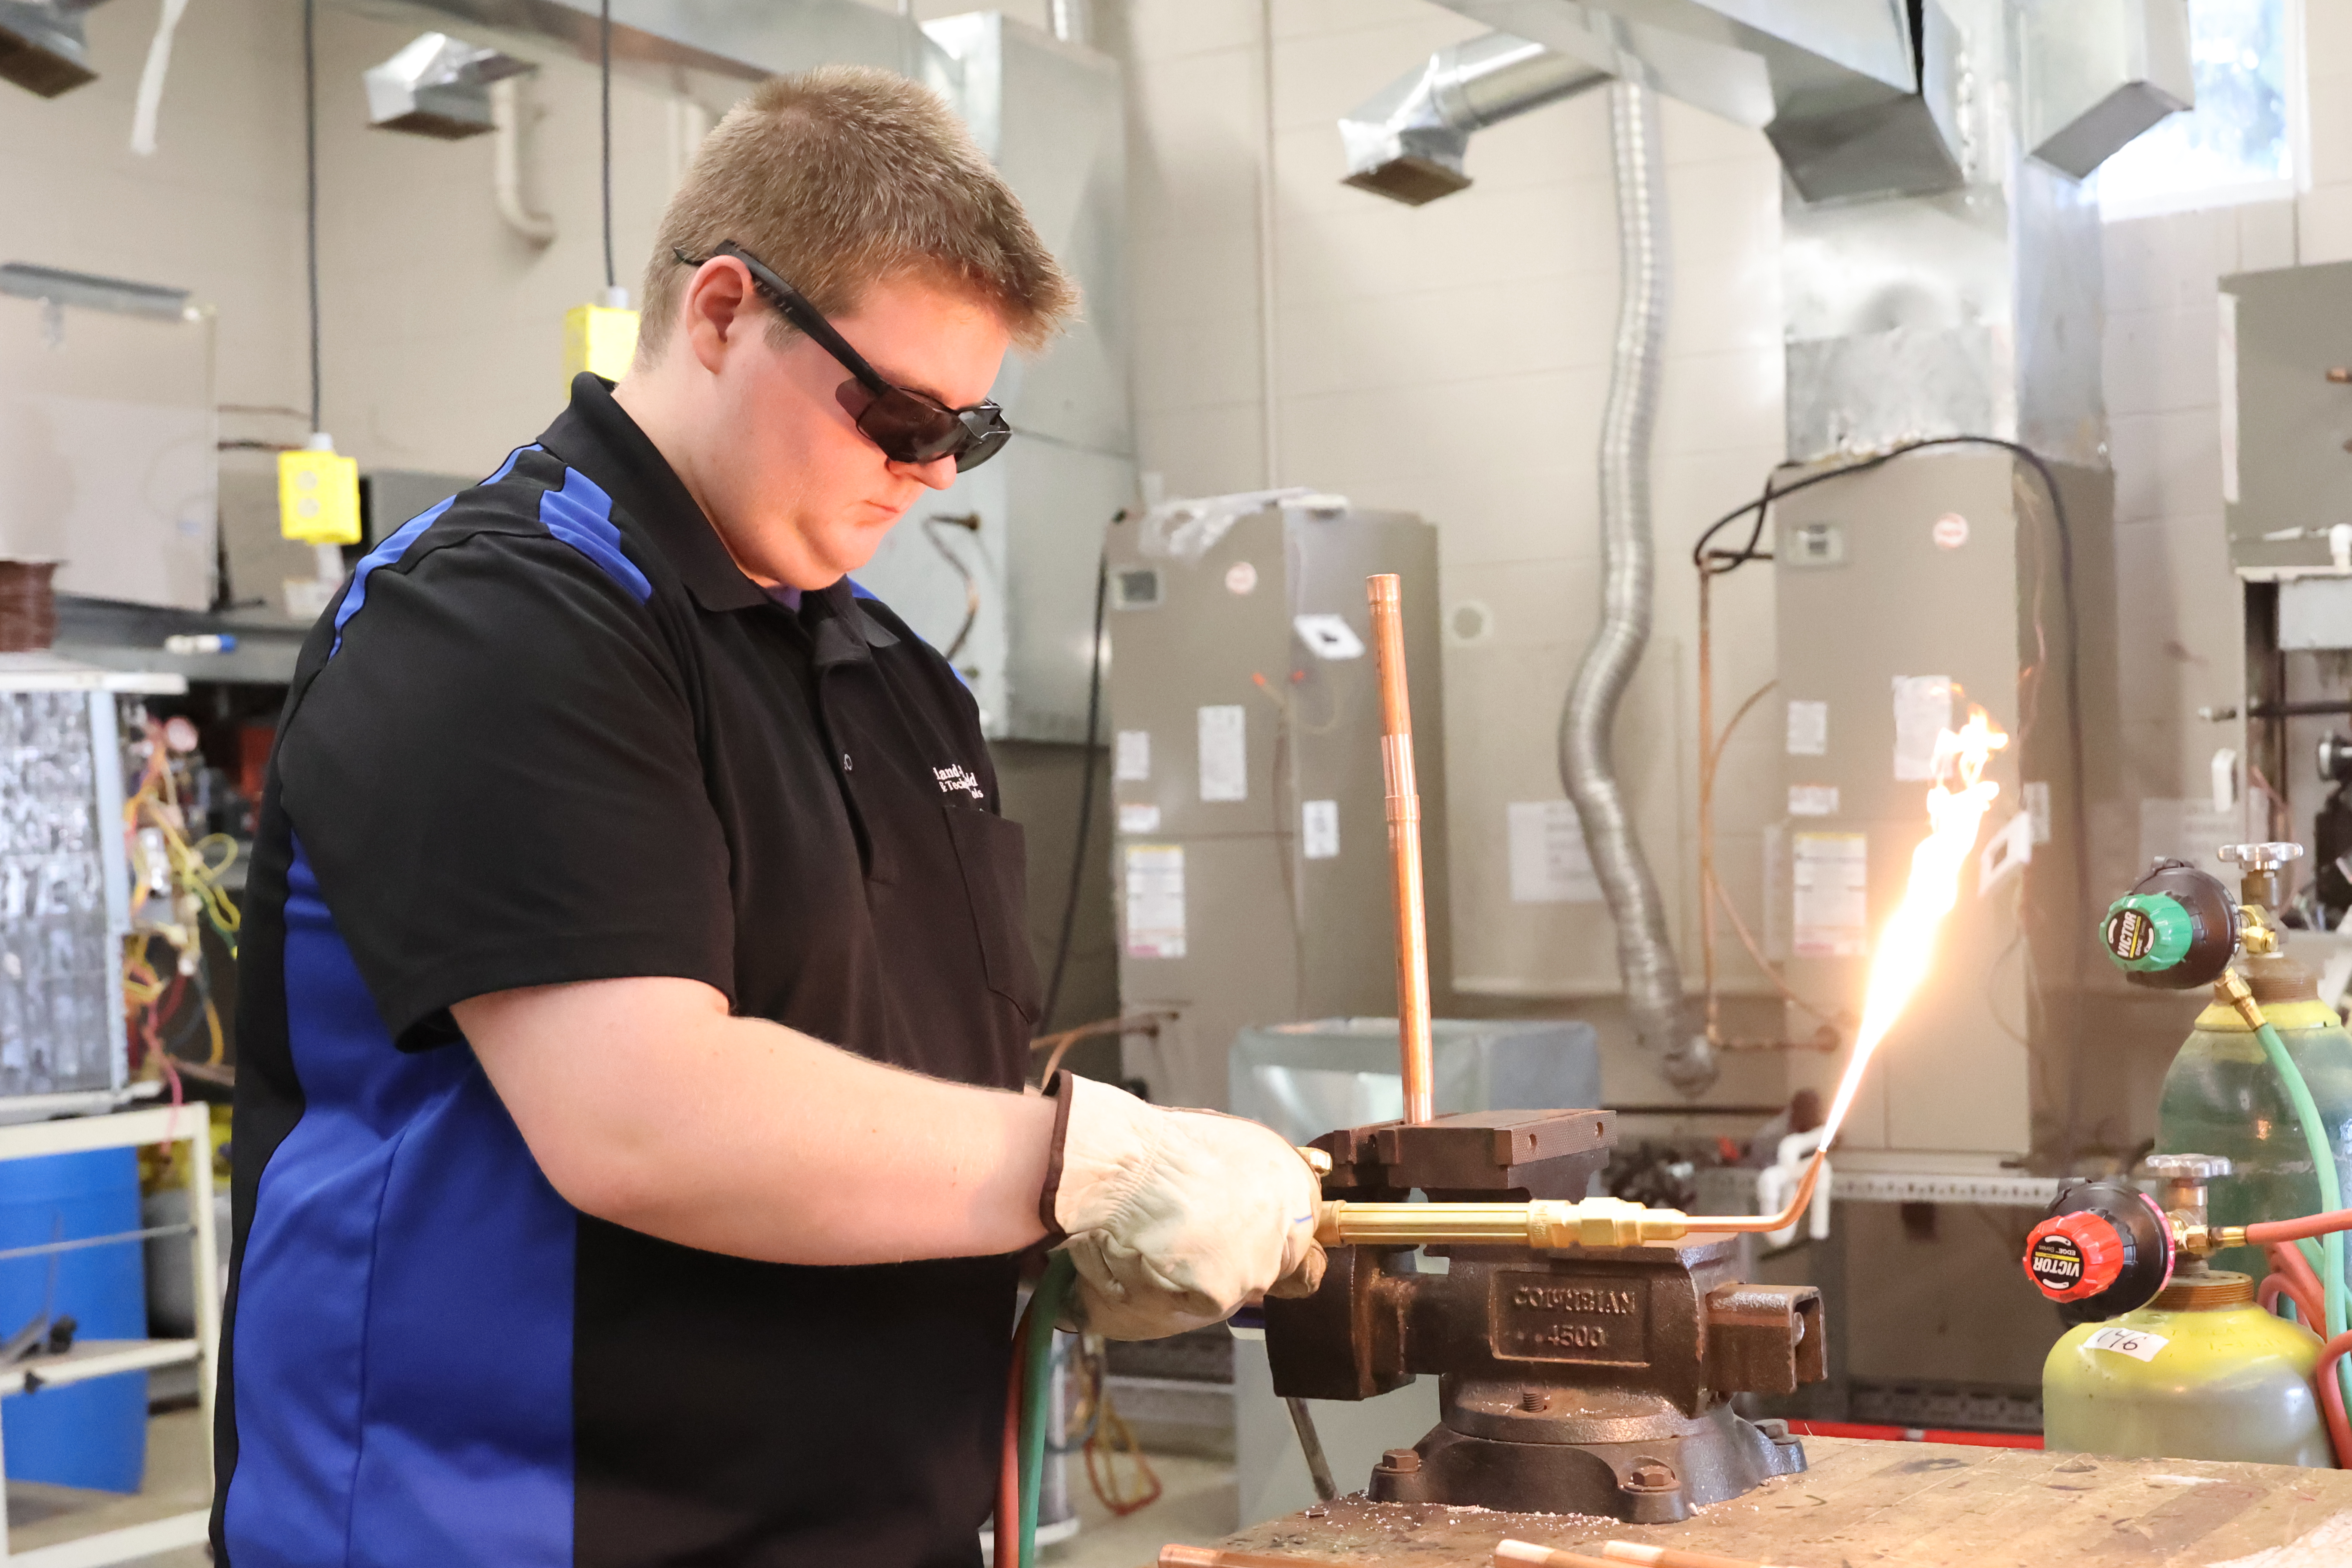 A White male student ignites a flame on his torch before getting ready to weld.